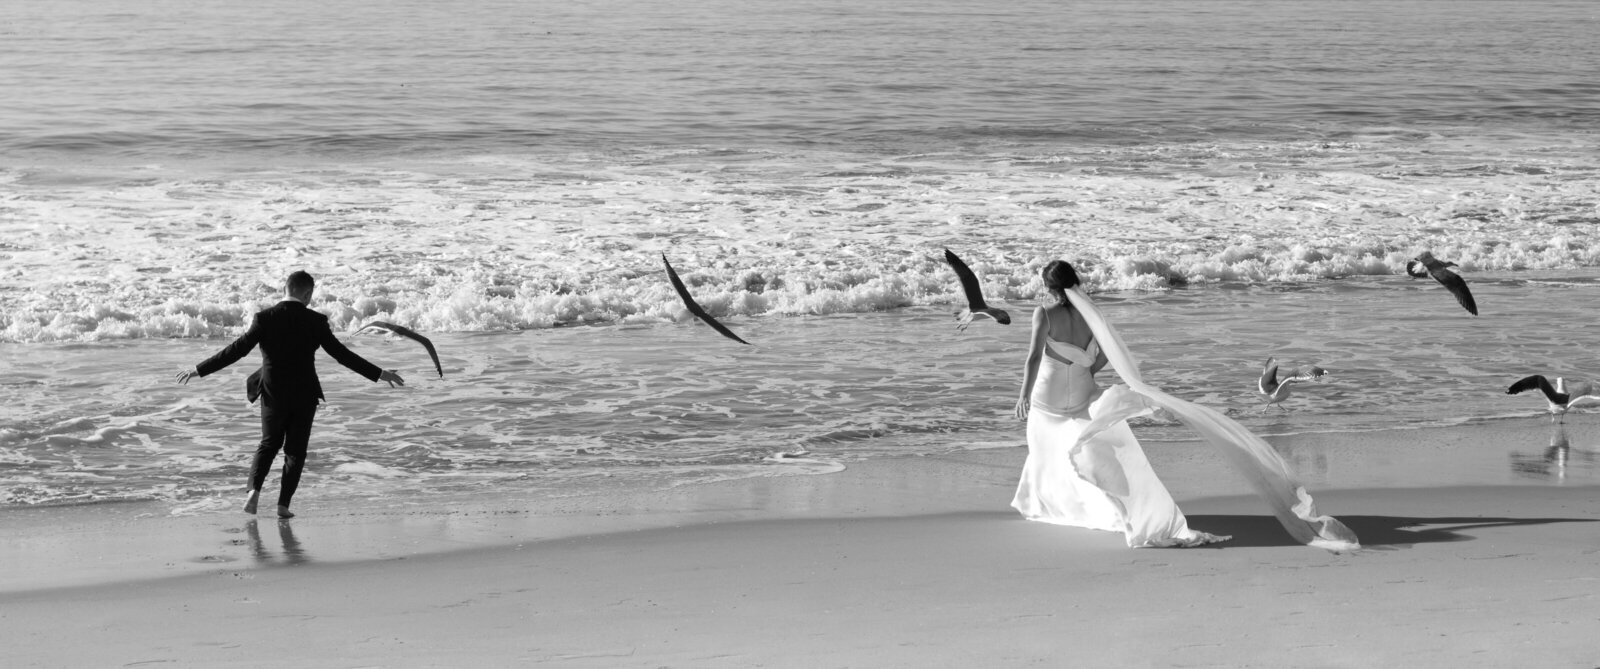 bride and groom running on the beach